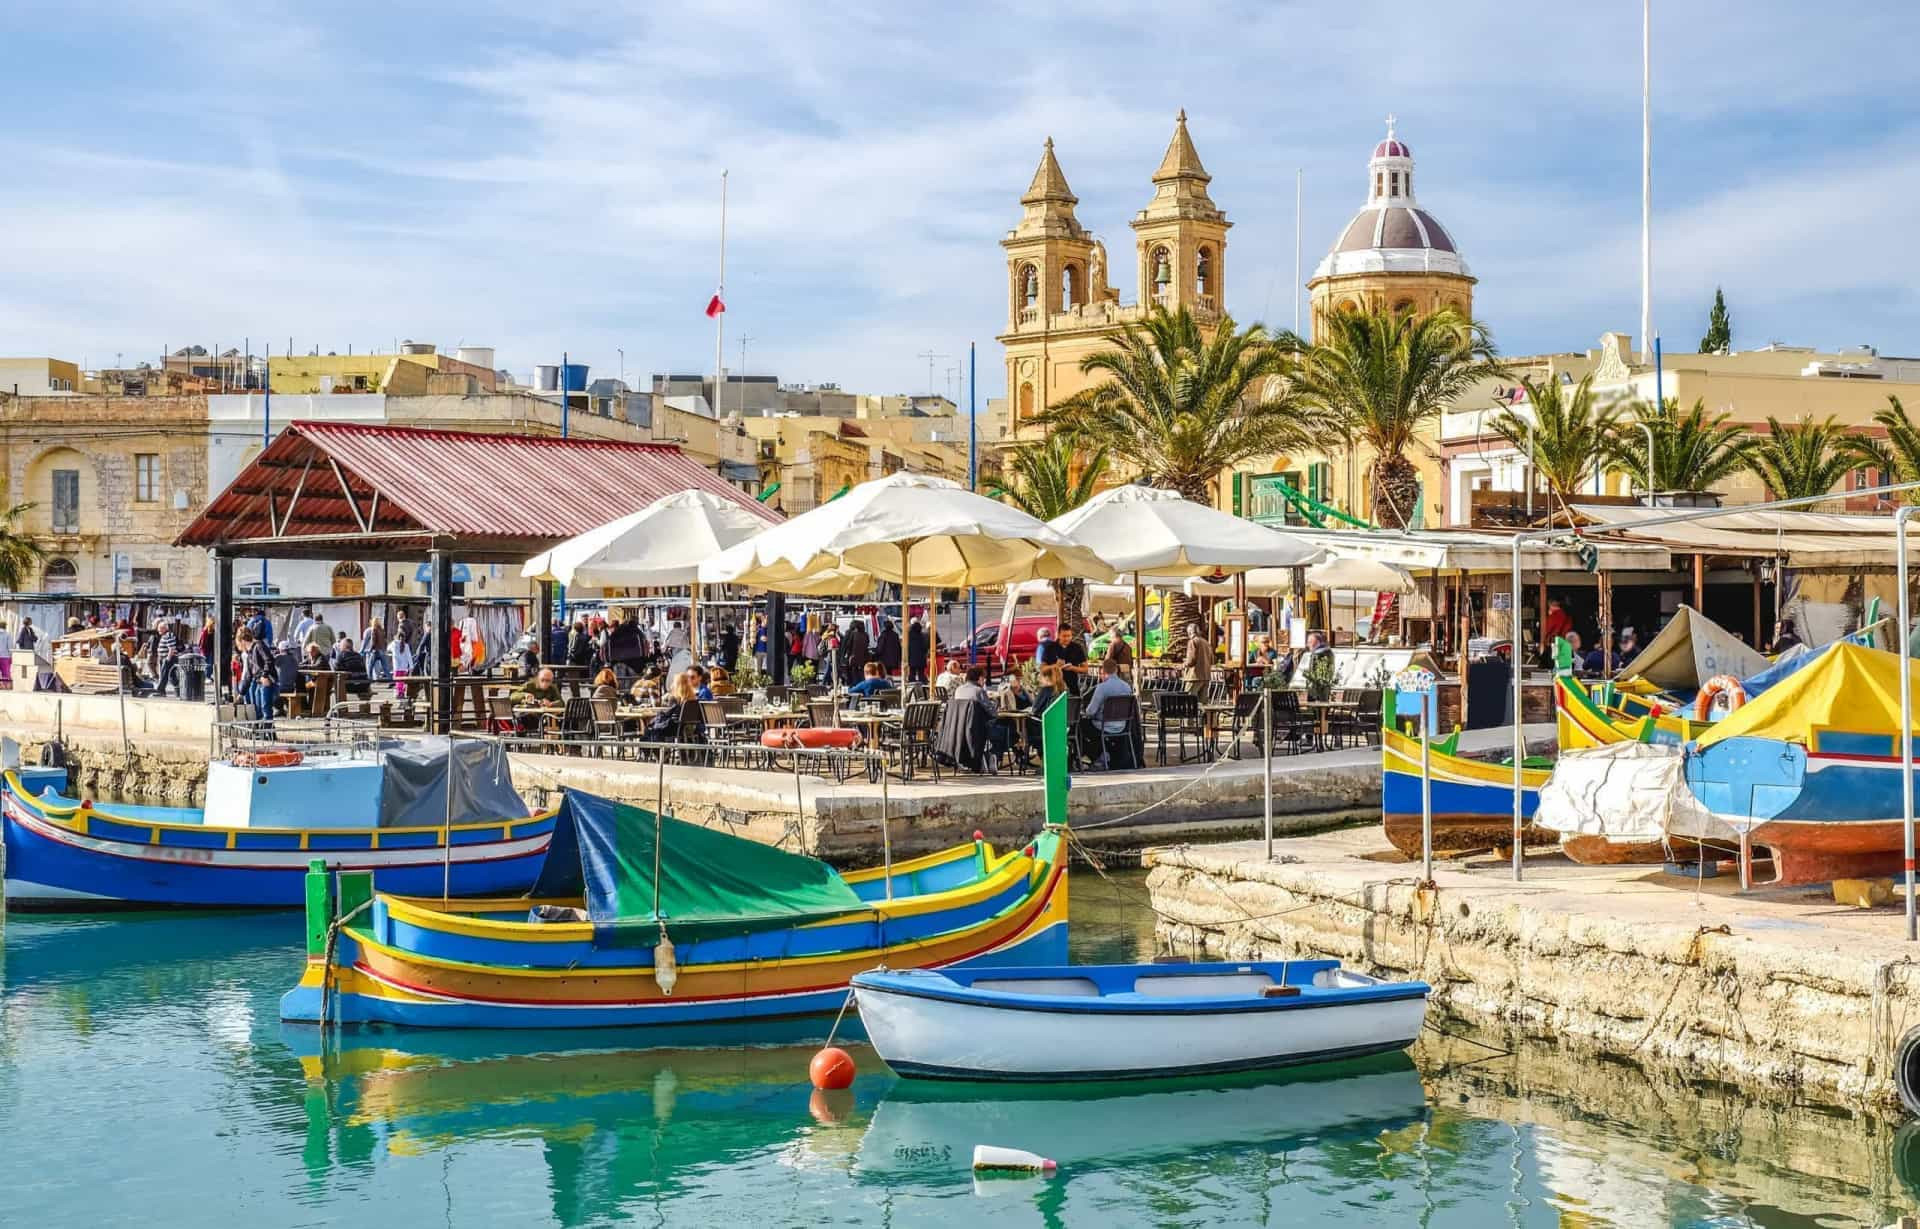 <p>One of the smallest countries in Europe, Malta is truly a jewel of the <a href="https://www.starsinsider.com/travel/247223/idyllic-islands-of-the-mediterranean-to-warm-up-your-dreams" rel="noopener">Mediterranean</a>. The archipelago drifts between Italy and North Africa, and is often overlooked despite its rich history, gorgeous terrain, and abundant sunshine.</p> <p>Somehow this idyllic location has remained off many people’s radar, making it even more of a must-see destination. Whether you’re a solo traveler or with a family, looking for parties or relaxation, searching for the finest food or architecture—Malta has something for everyone.</p> <p>So when you’re planning your next vacation, skip the tourist-packed obvious choices in Europe, and head to the islands. Click on to see some stunning photos that'll have you booking tickets.</p><p>You may also like:<a href="https://www.starsinsider.com/n/180975?utm_source=msn.com&utm_medium=display&utm_campaign=referral_description&utm_content=397154v6en-us"> The worst epidemics ever to hit the US</a></p>